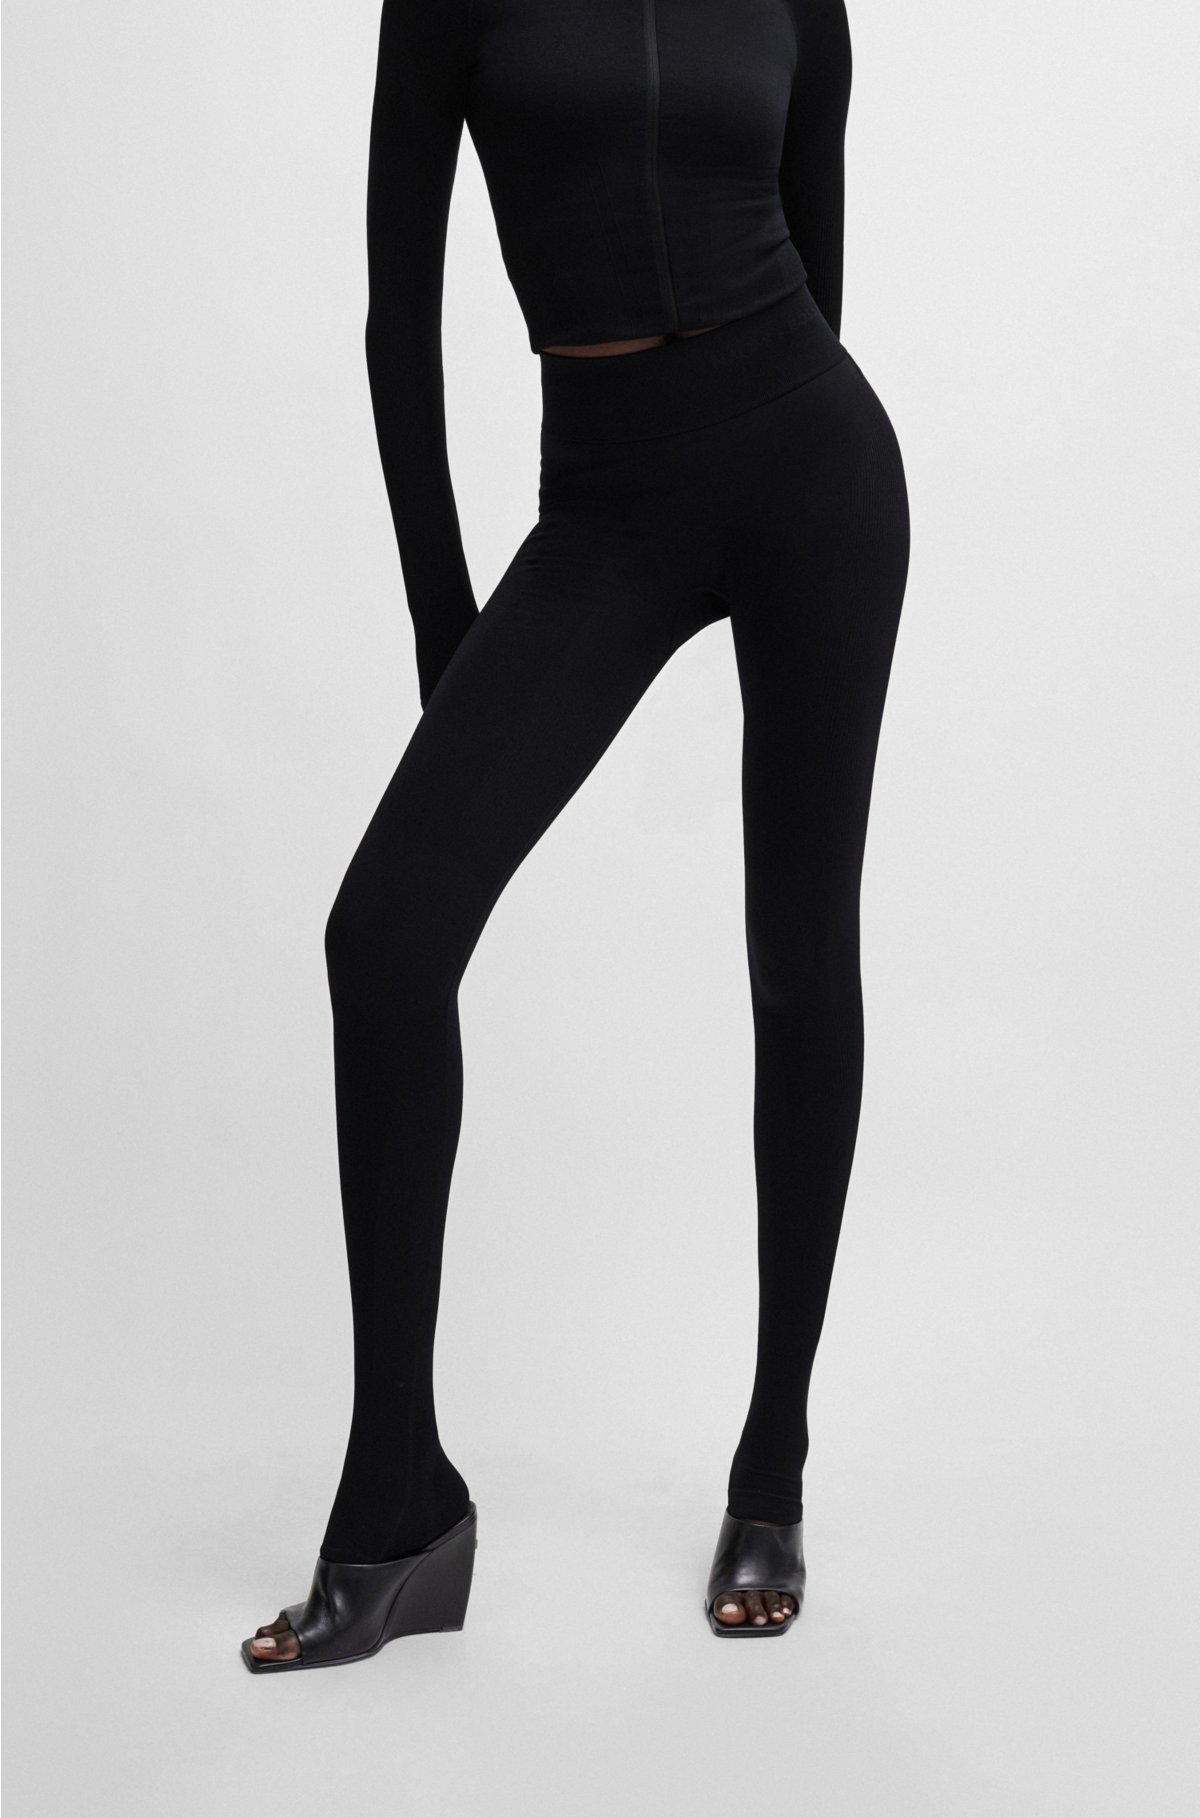 Shop Your Store Blue Unlined Tights & Leggings.